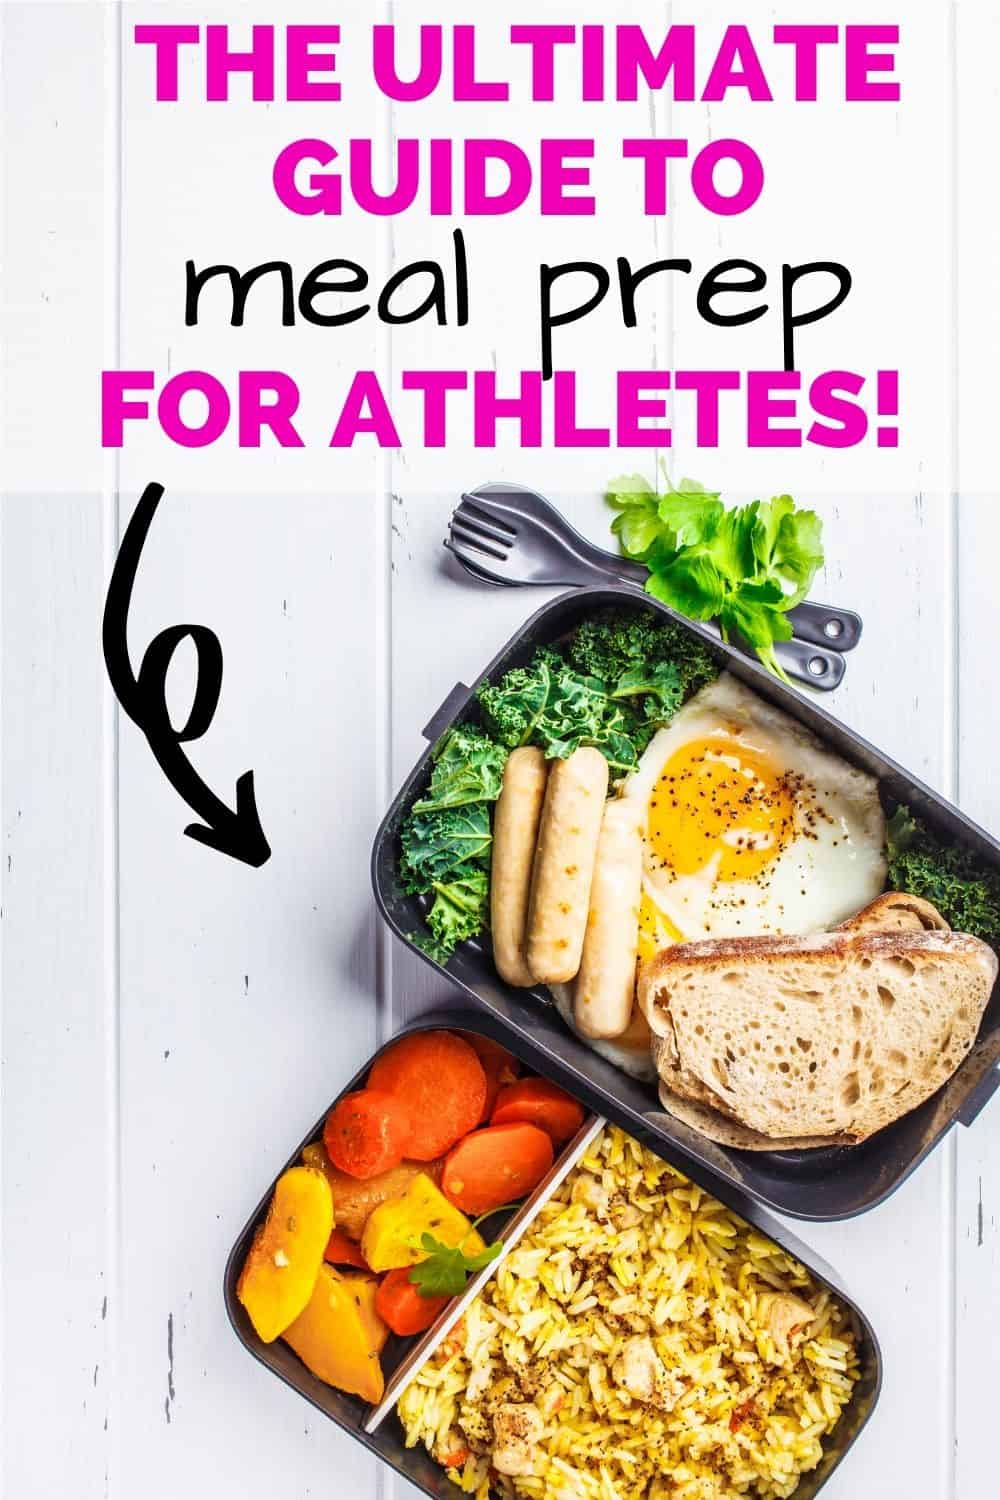 Quick and easy athlete meals